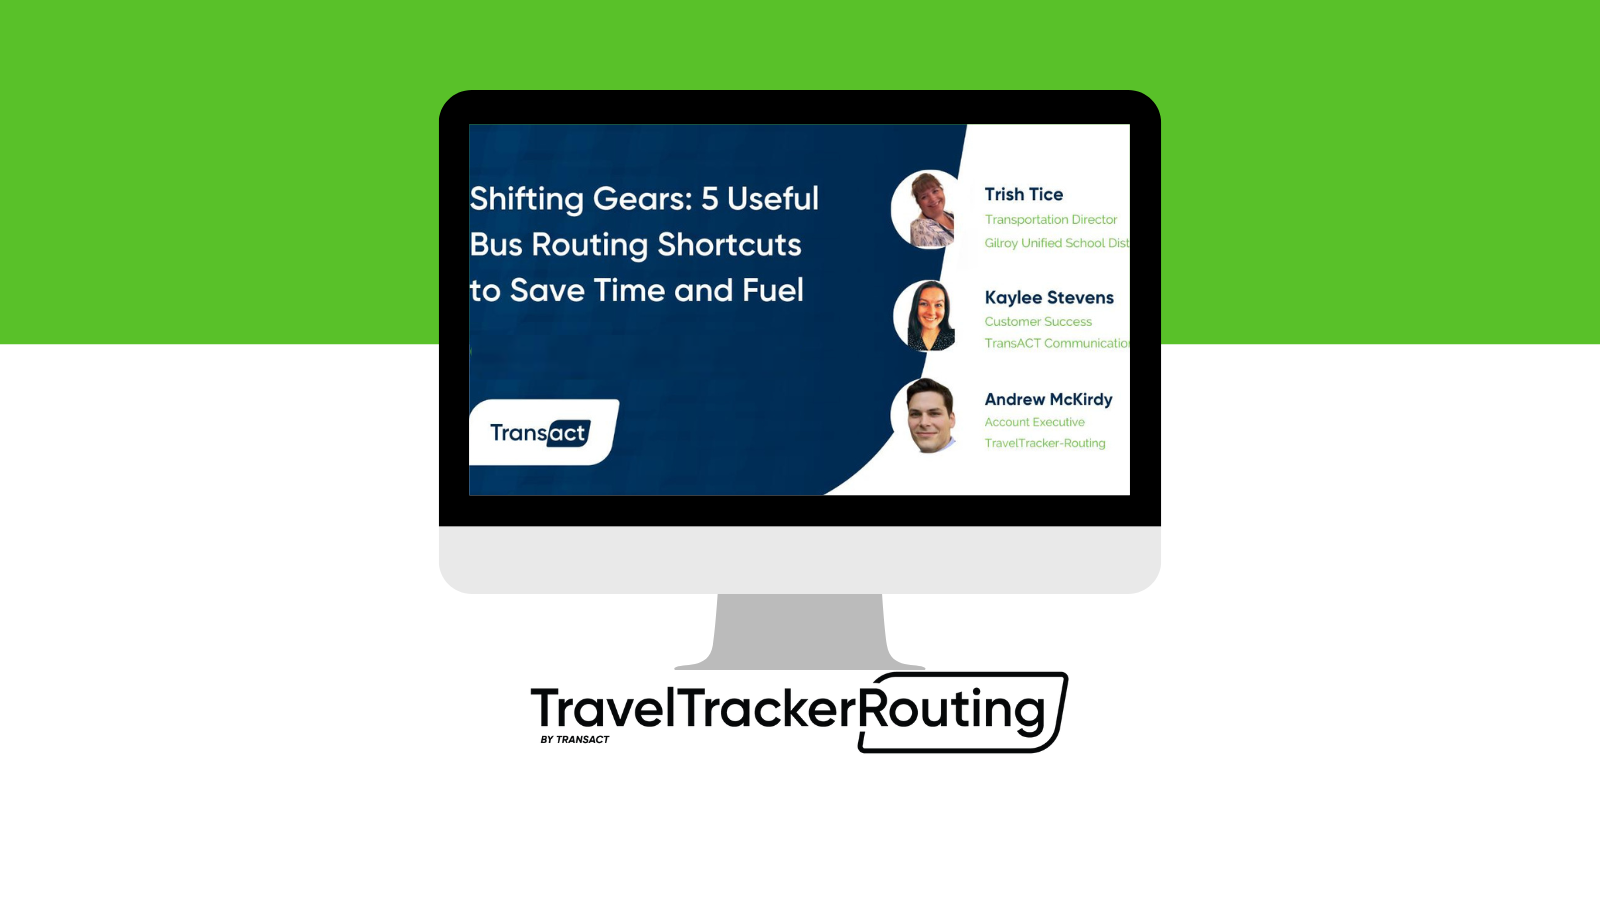 Shifting Gears: 5 Useful Bus Routing Shortcuts to Save Time and Fuel